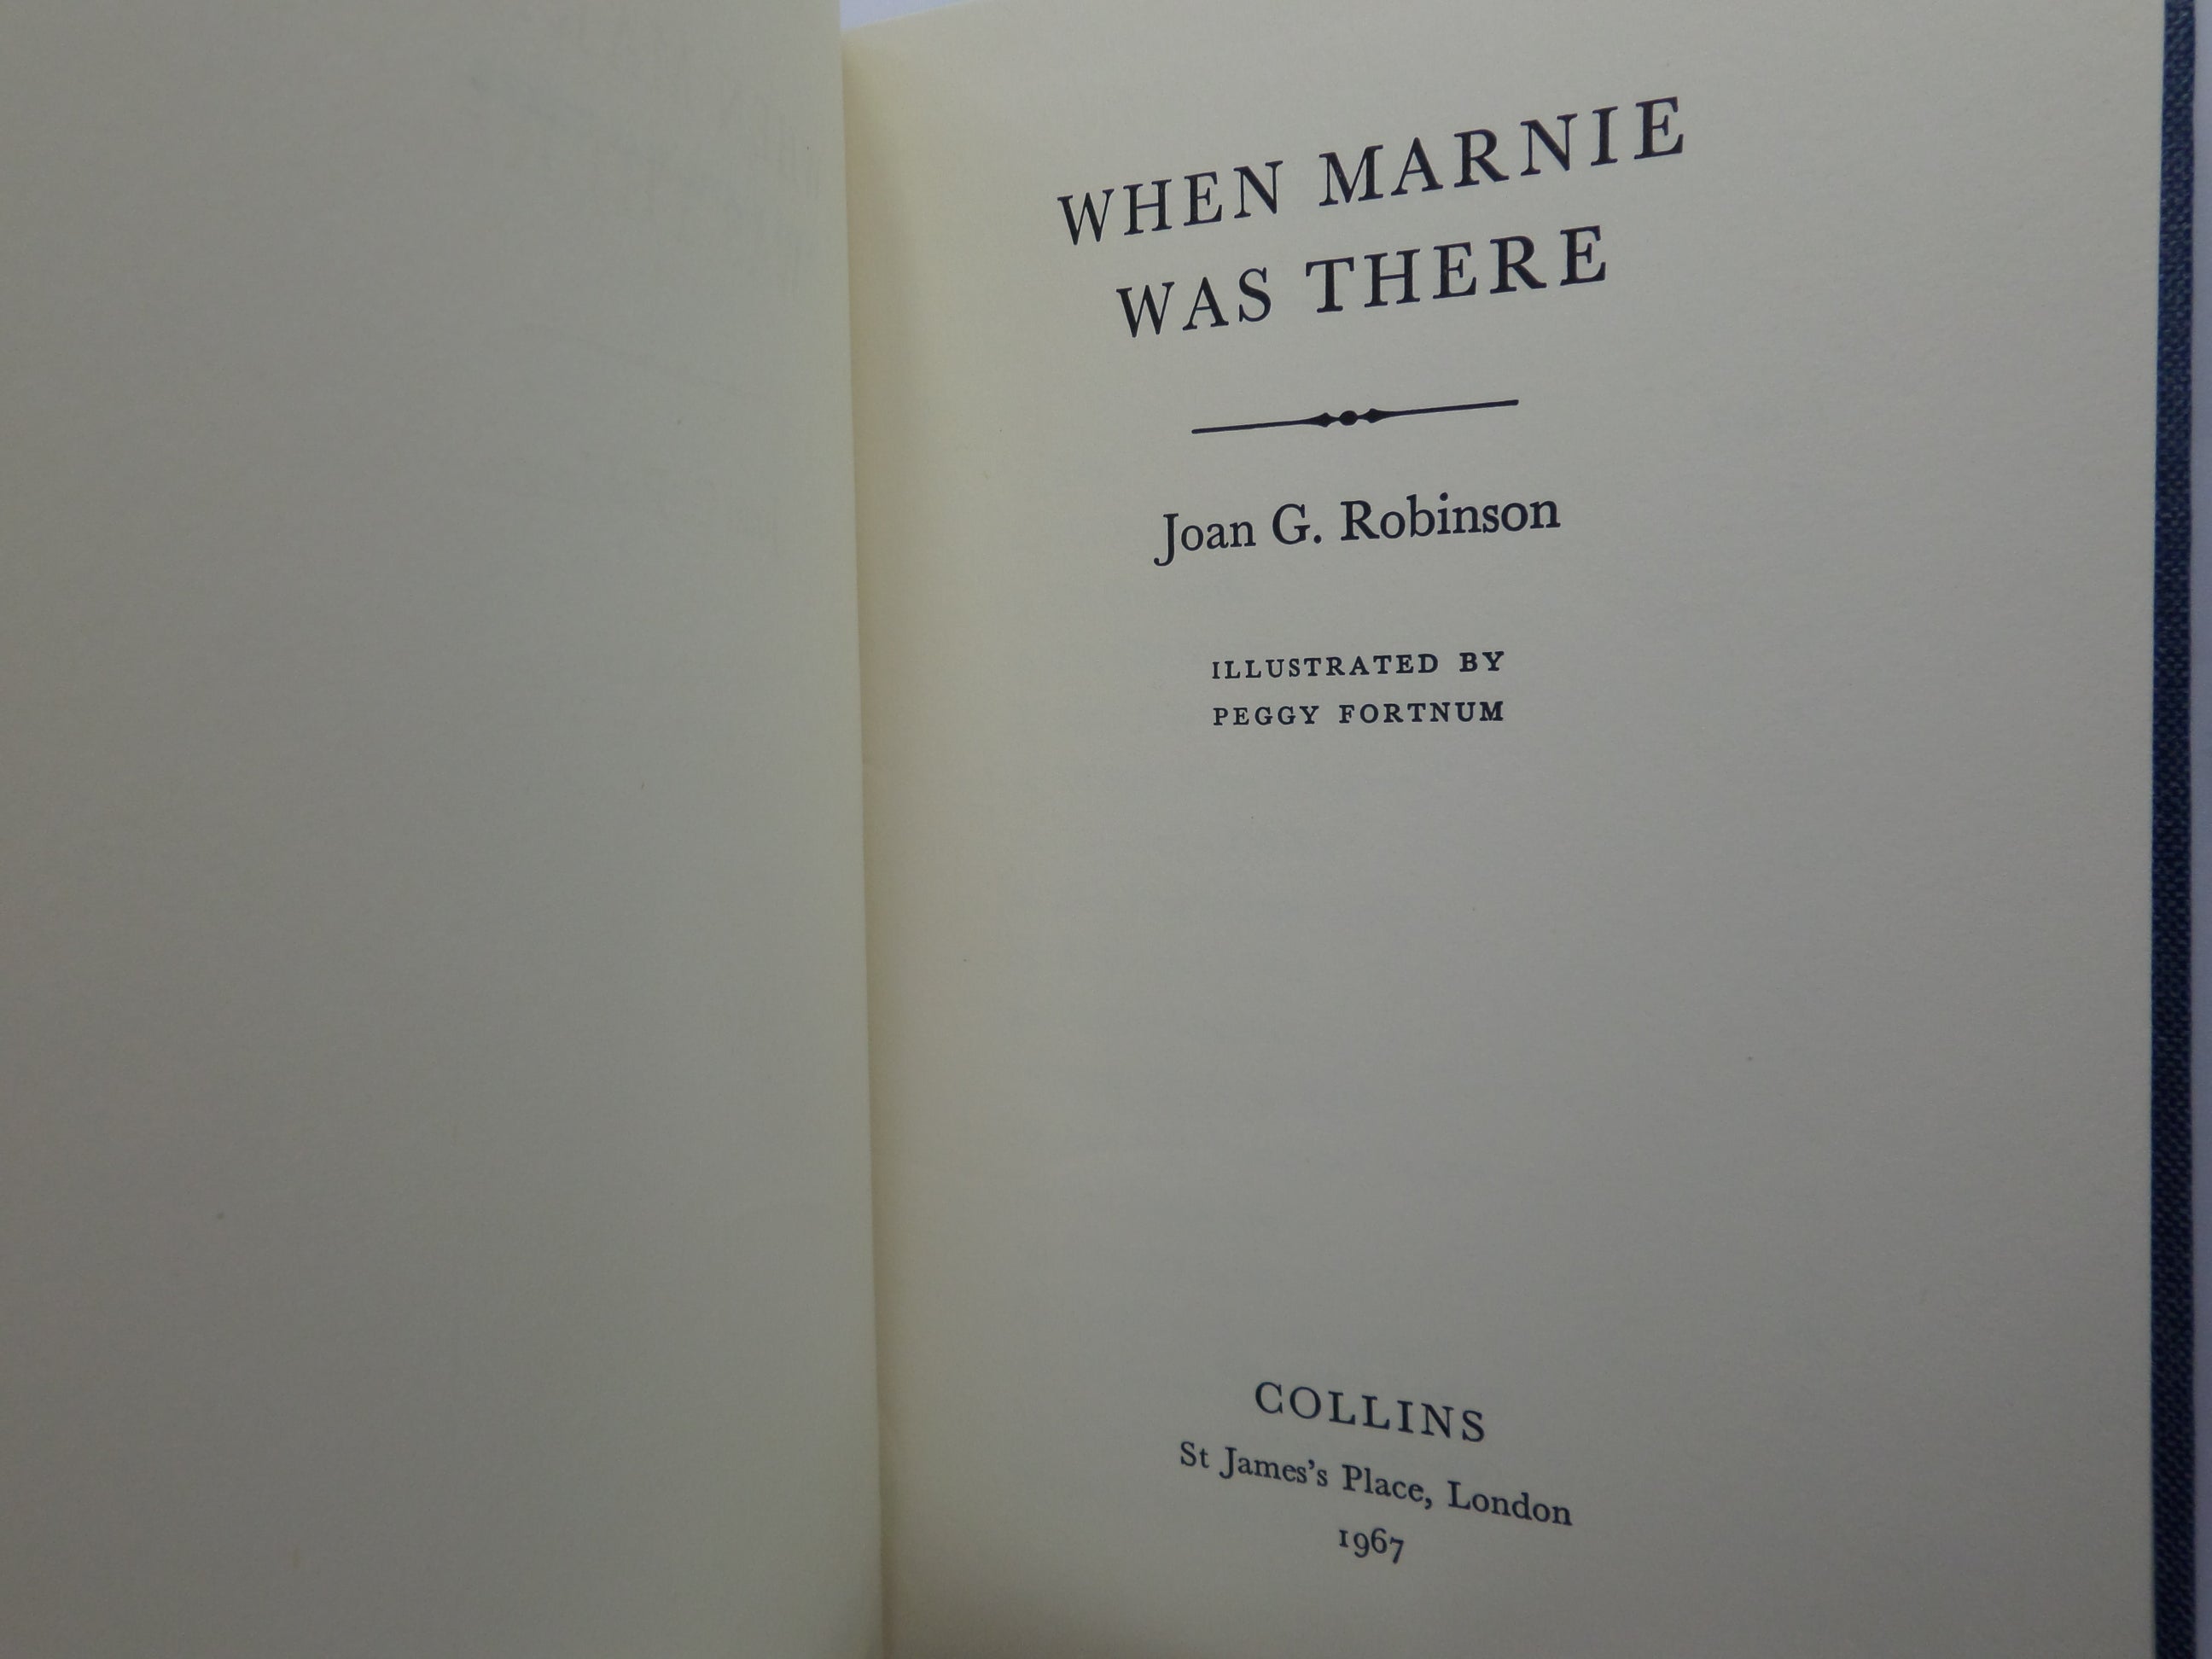 WHEN MARNIE WAS THERE BY JOAN G. ROBINSON 1967 FIRST EDITION